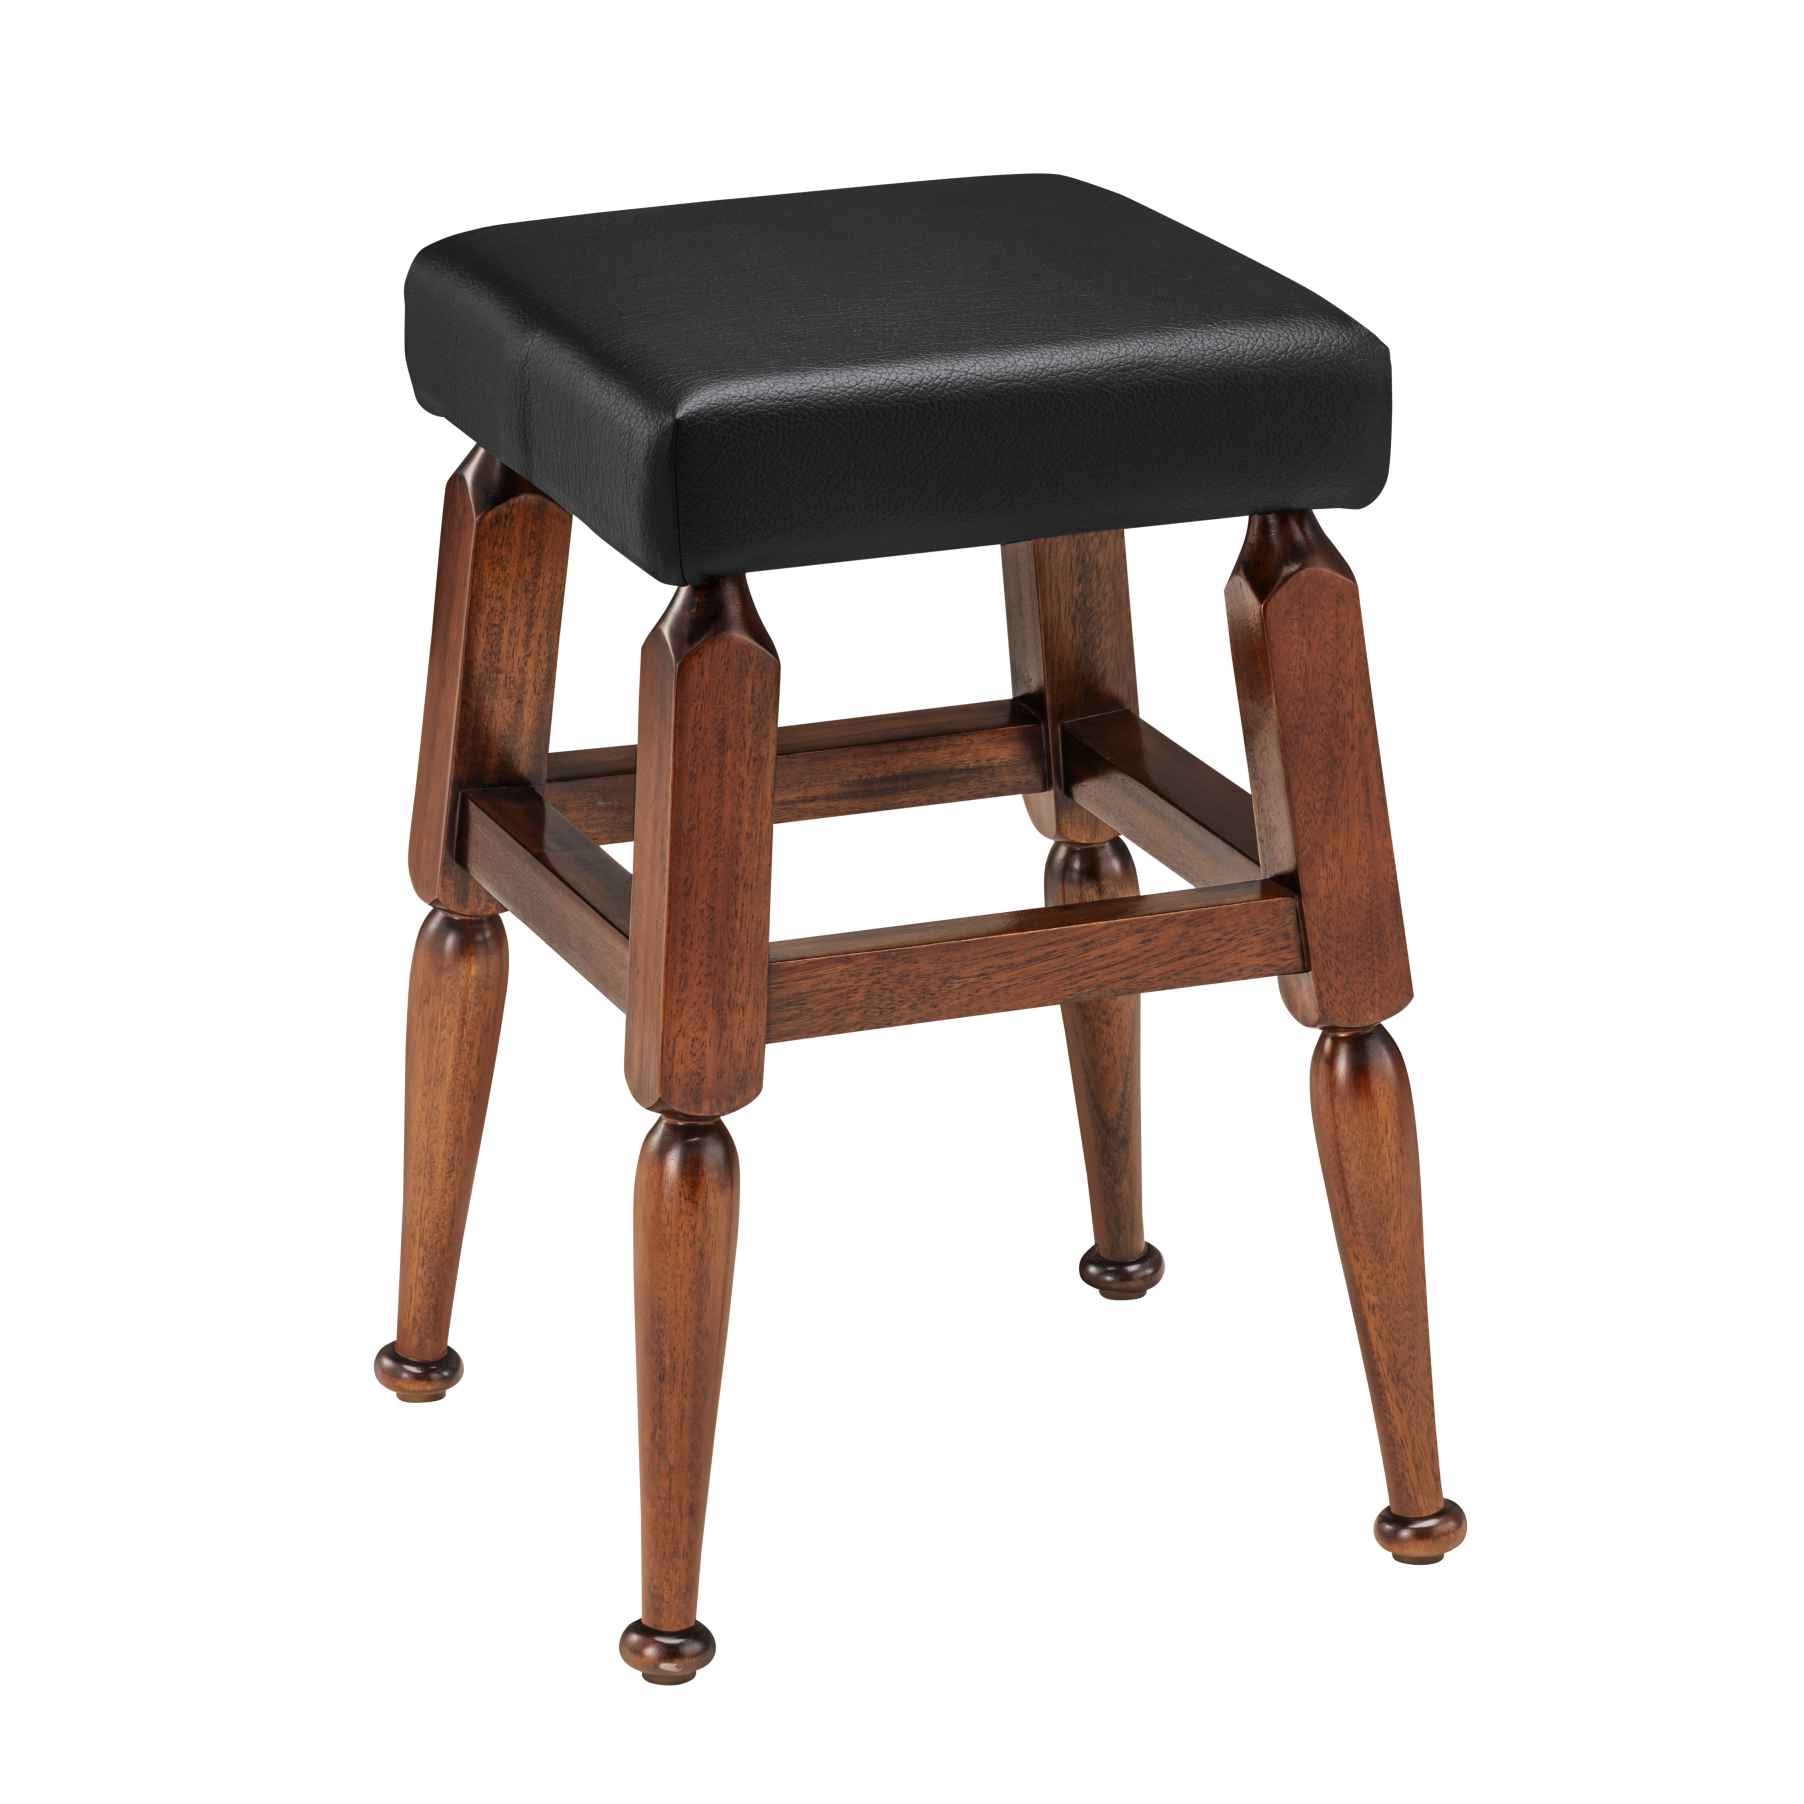 Mayan Low Barstool, Black By Authentic Models